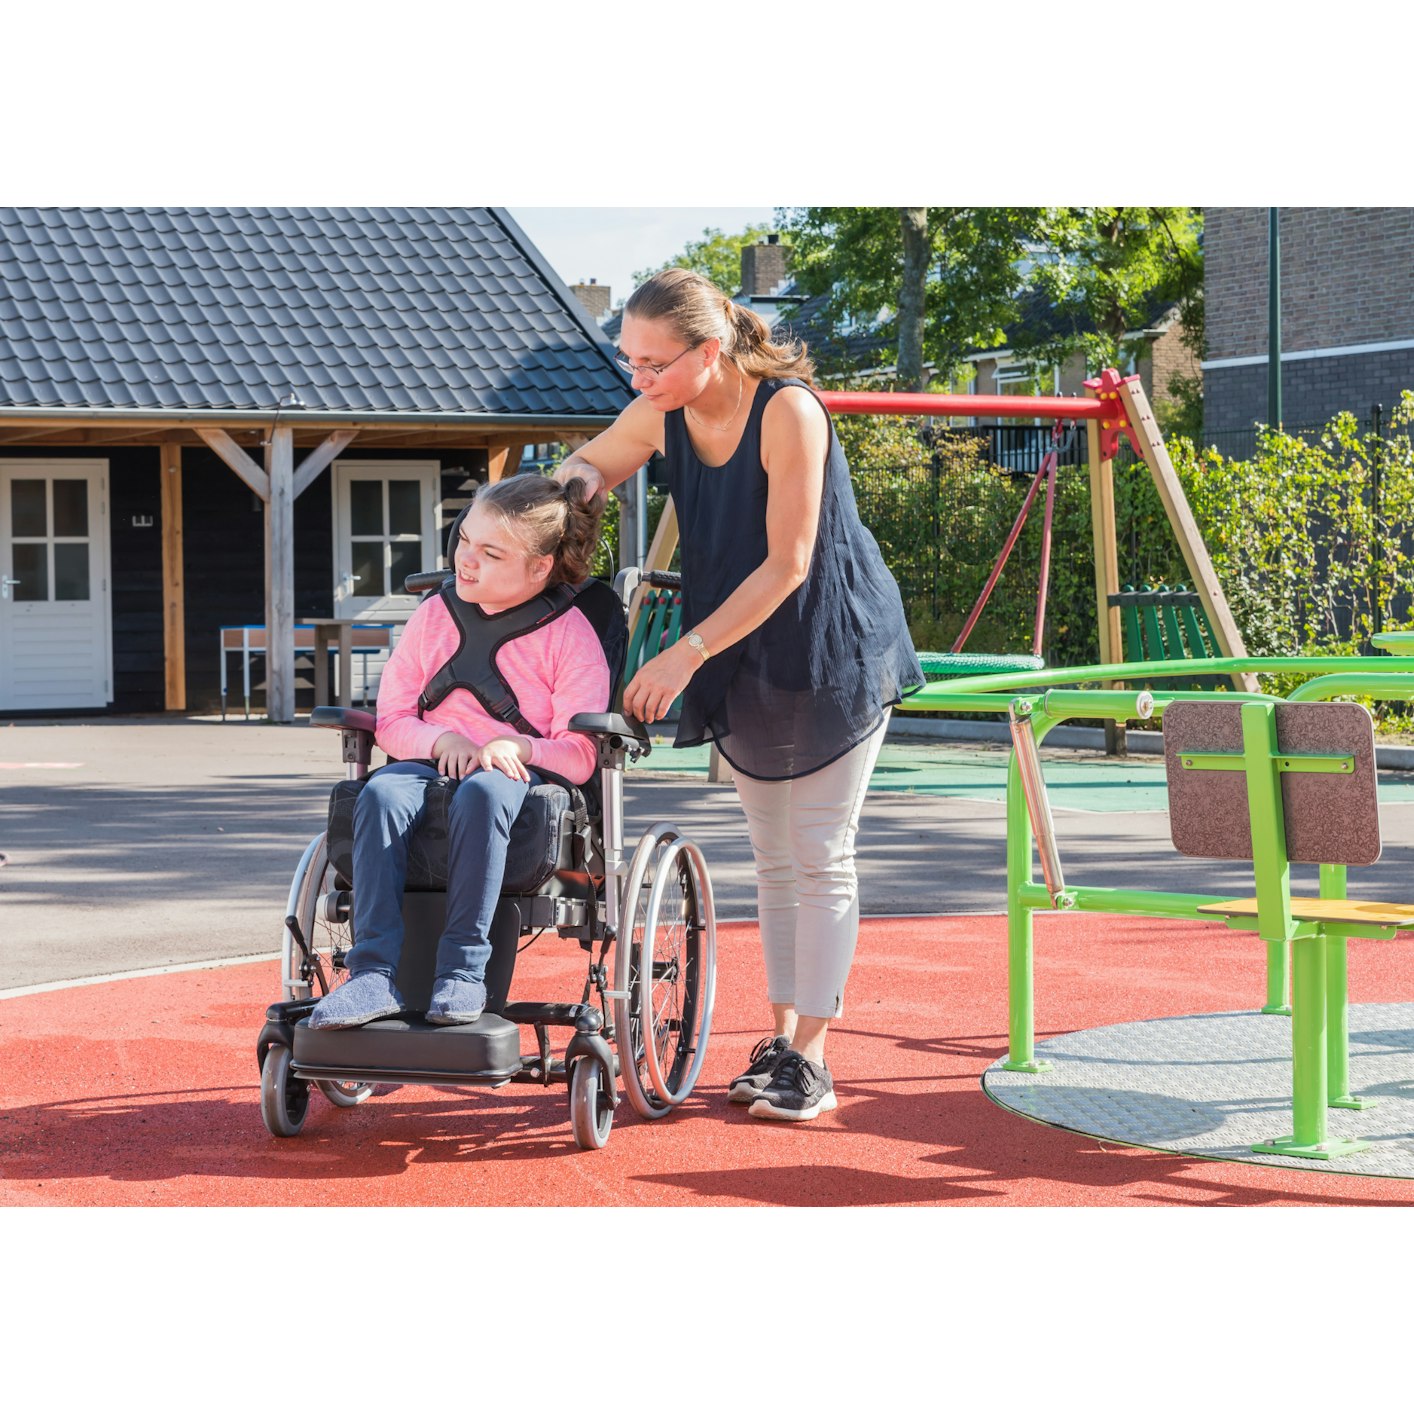 Student in a wheelchair in the playground accompanied by a teacher or carer